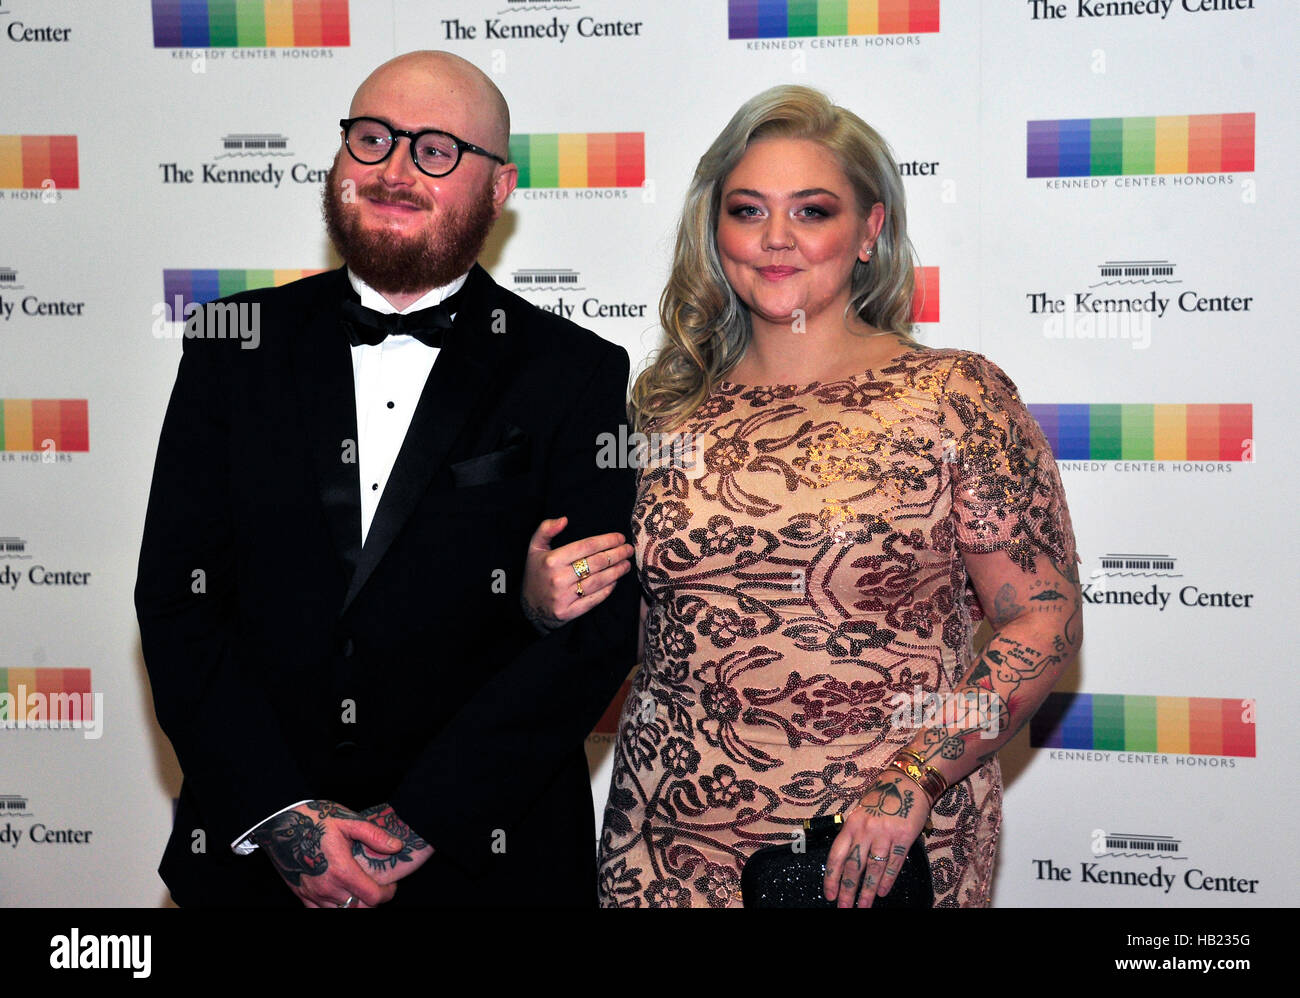 Washington, Us. 03rd Dec, 2016. Singer Elle King and fiance Andrew Ferguson arrive for the formal Artist's Dinner honoring the recipients of the 39th Annual Kennedy Center Honors hosted by United States Secretary of State John F. Kerry at the U.S. Department of State in Washington, DC on Saturday, December 3, 2016. The 2016 honorees are: Argentine pianist Martha Argerich; rock band the Eagles; screen and stage actor Al Pacino; gospel and blues singer Mavis Staples; and musician James Taylor. Credit: Ron Sachs/Pool via CNP - NO WIRE SERVICE - Photo: Ron Sachs/Consolidated/dpa/Alamy Live News Stock Photo